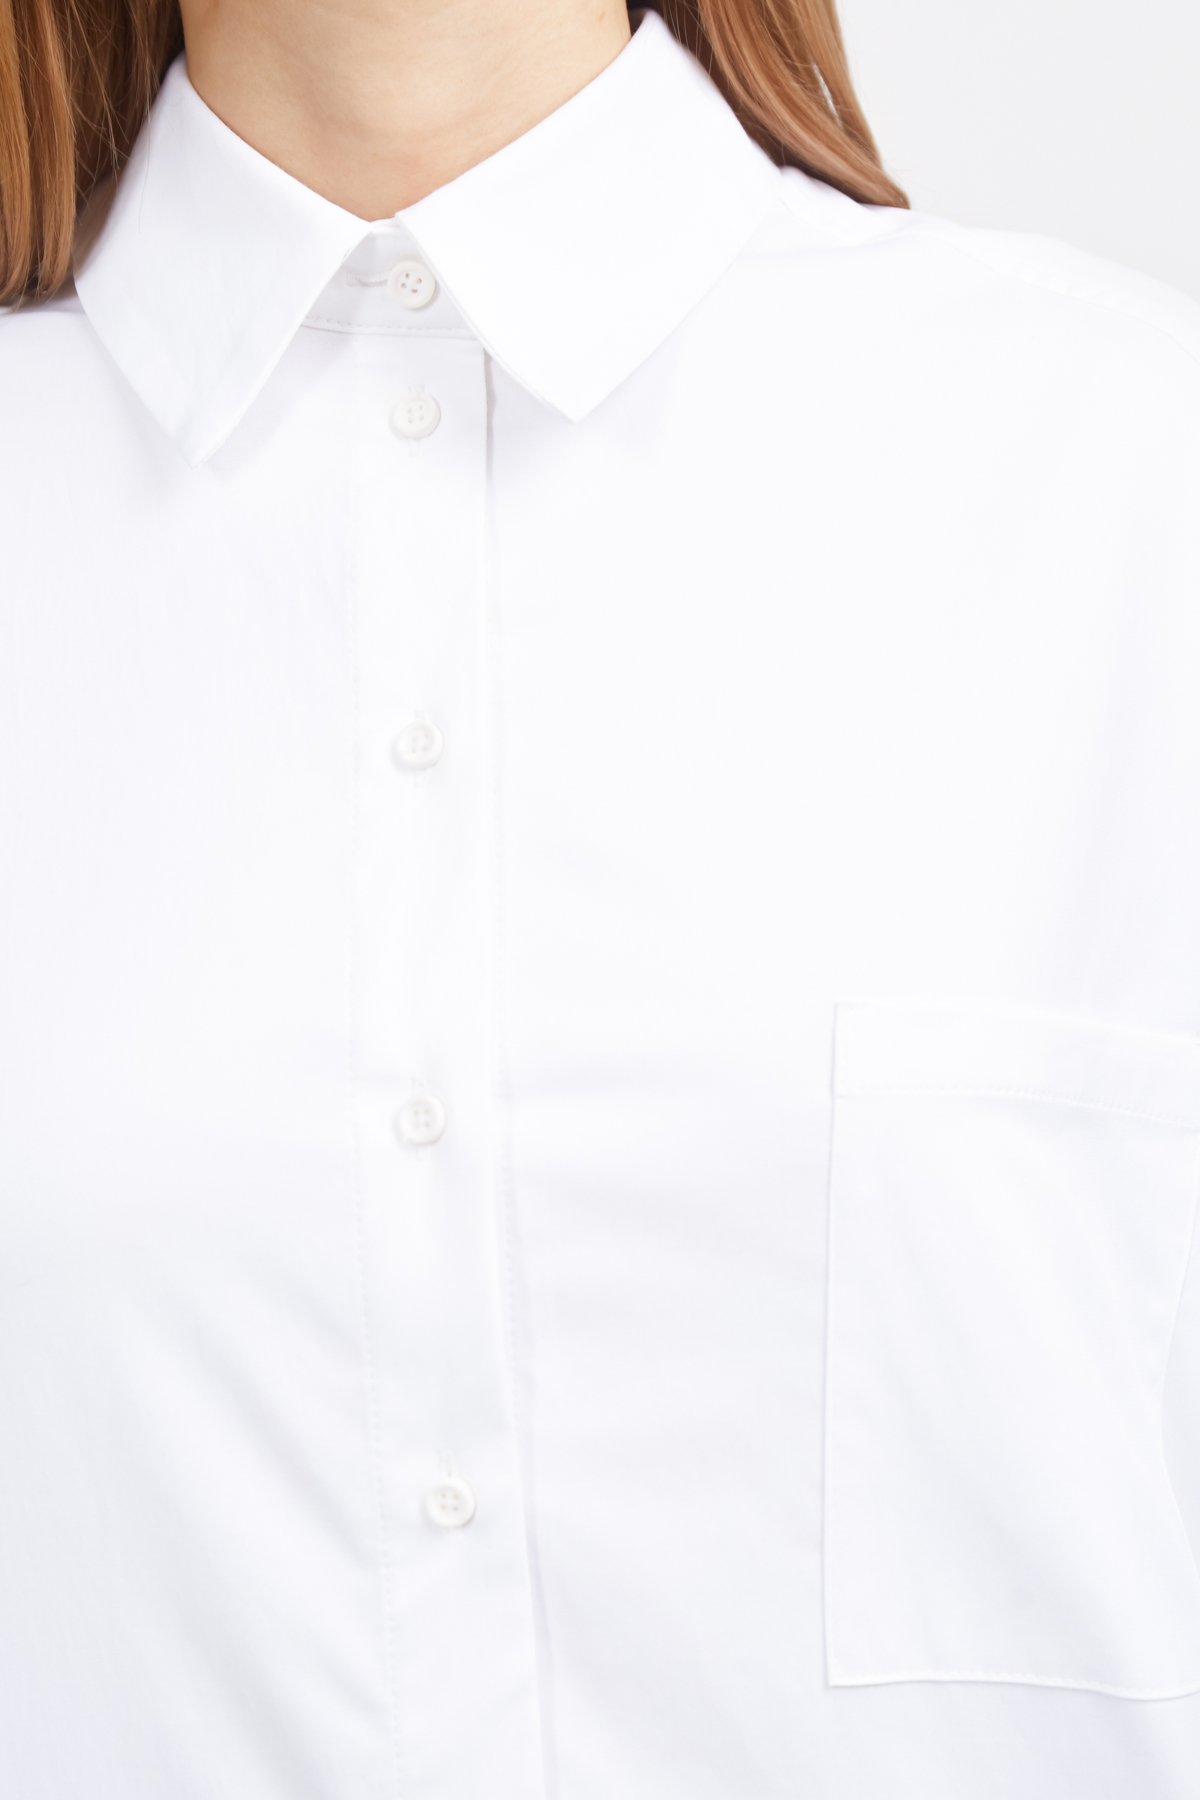 White free cut shirt with a lowered shoulder , photo 3